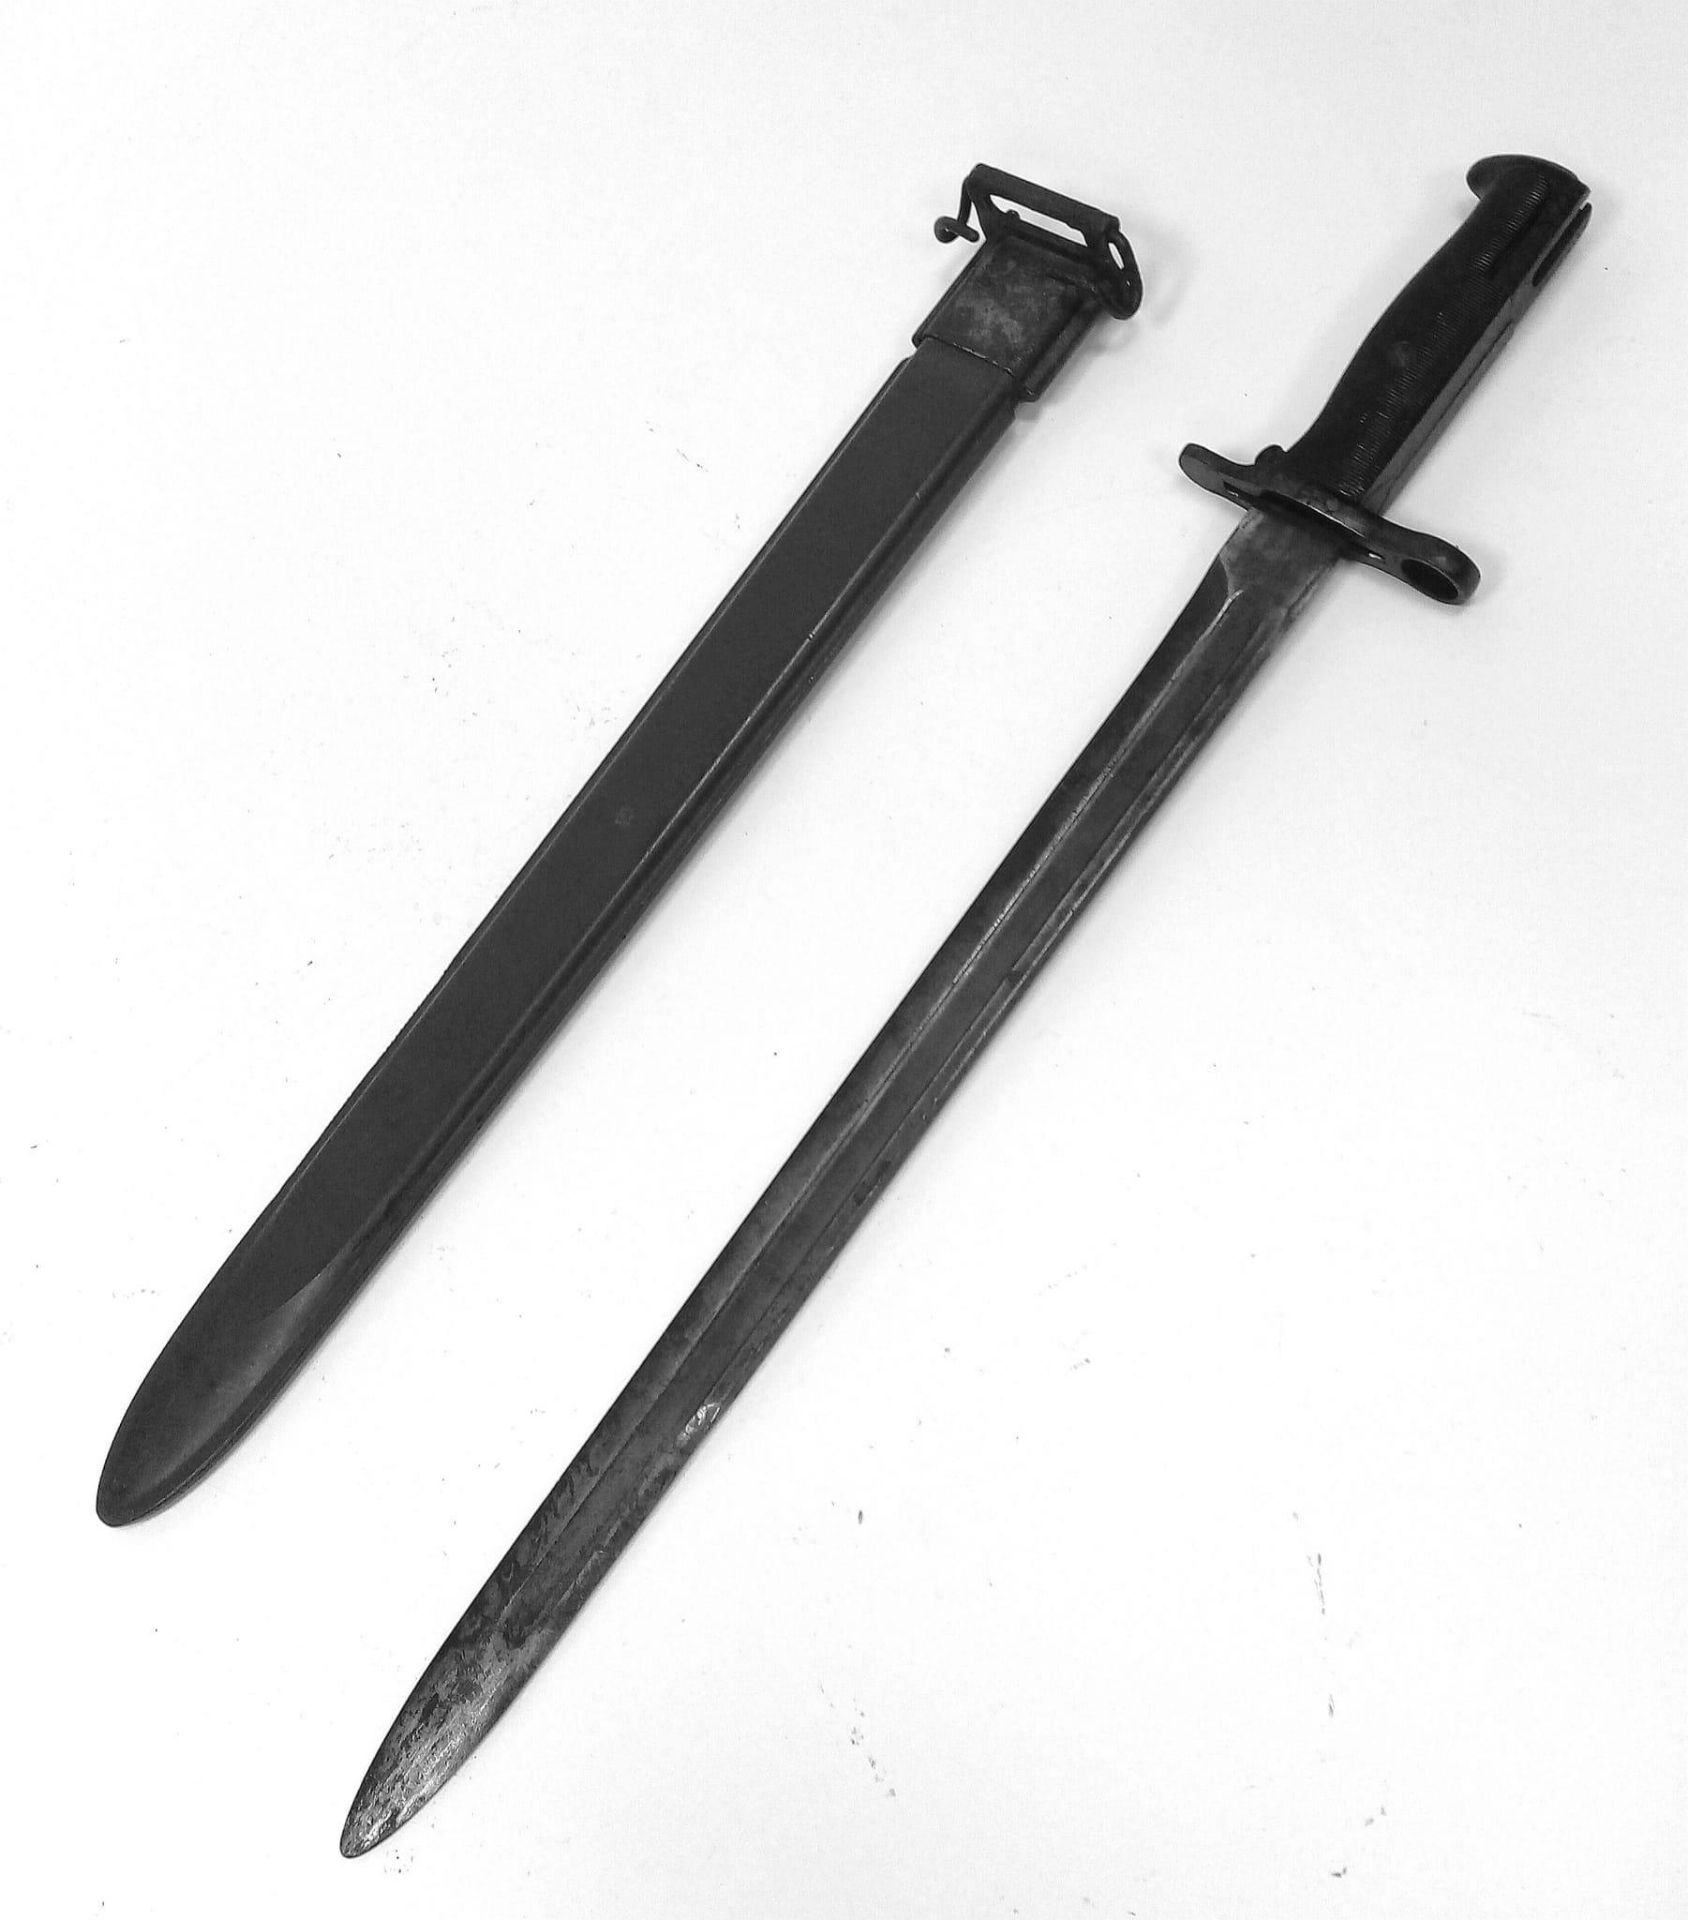 US Springfield Rock Island Arsenal M1905 16” Bayonet Dated 1906 re-issued in 1942 for the Garand - Image 4 of 15